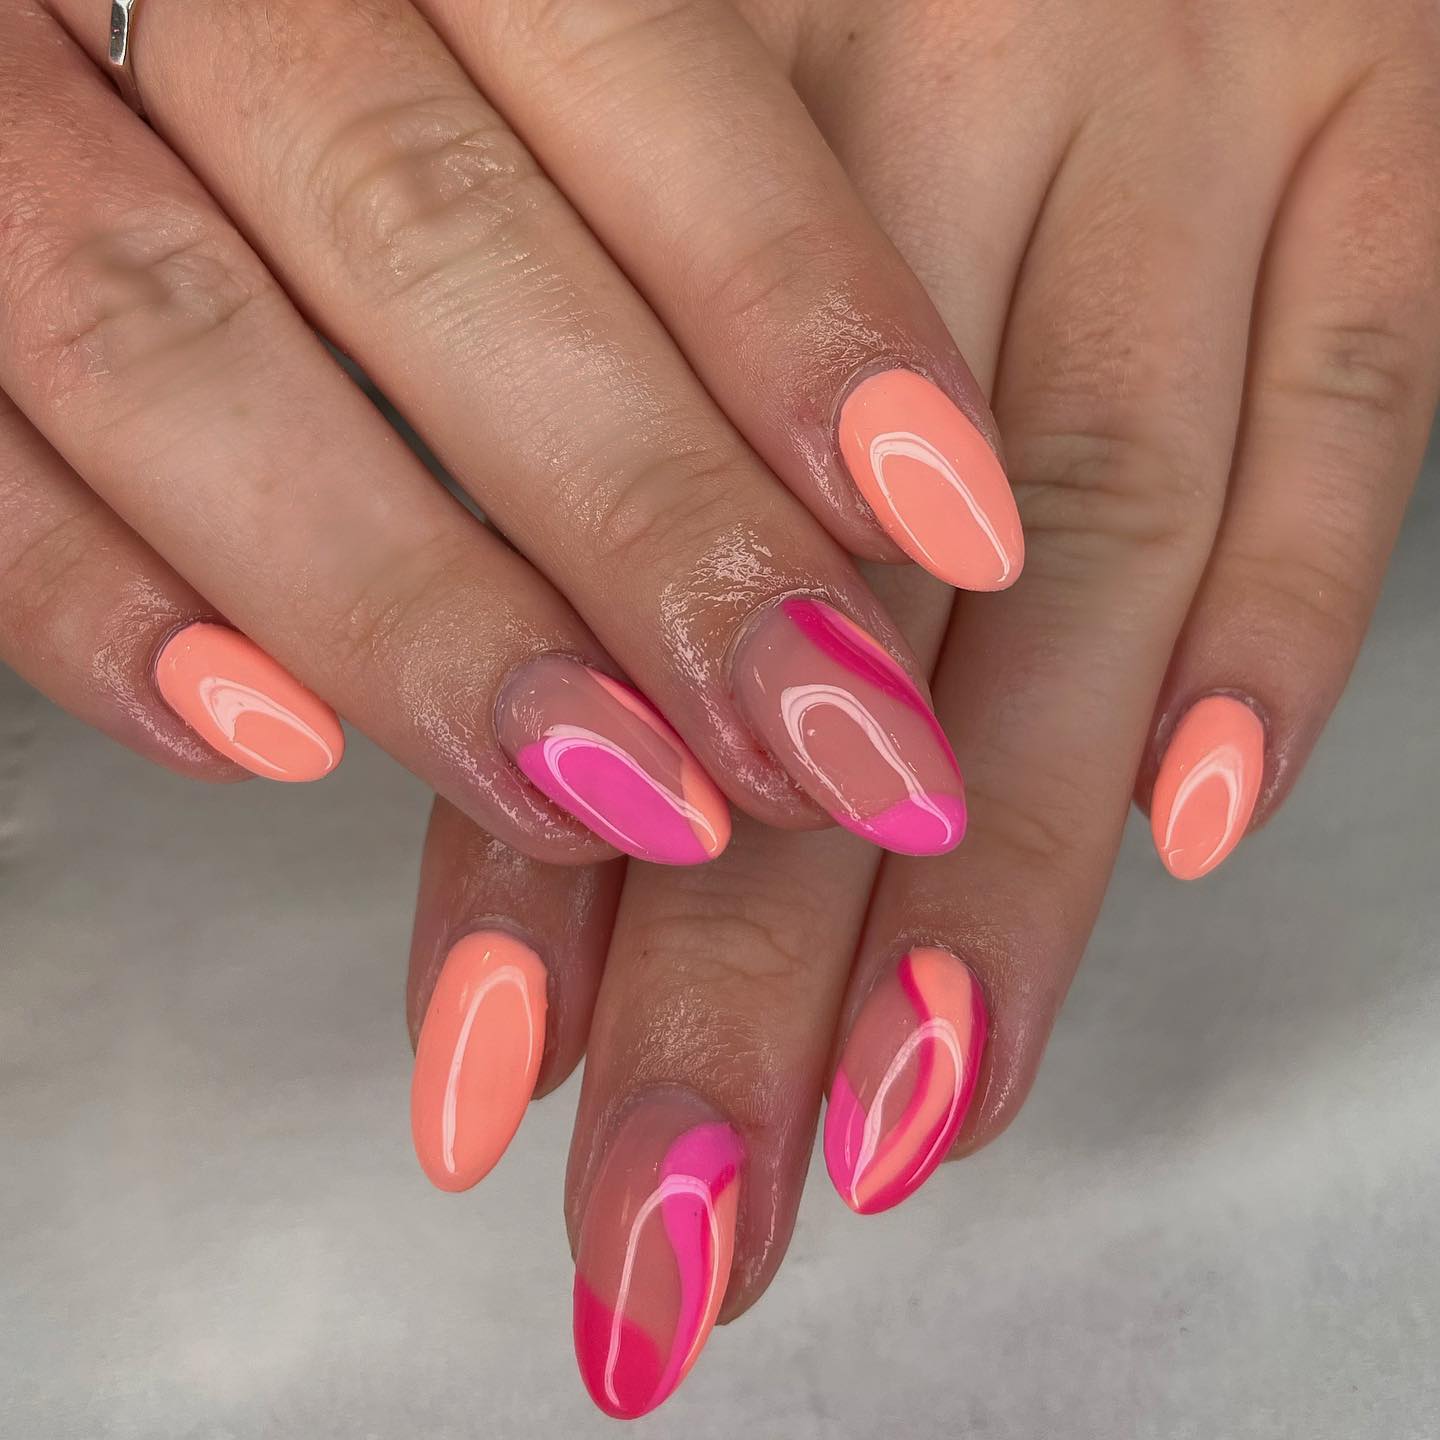 Coral and pink are shades that will work so well for the summer season. Go for this combo if you enjoy colorful and cute ideas.